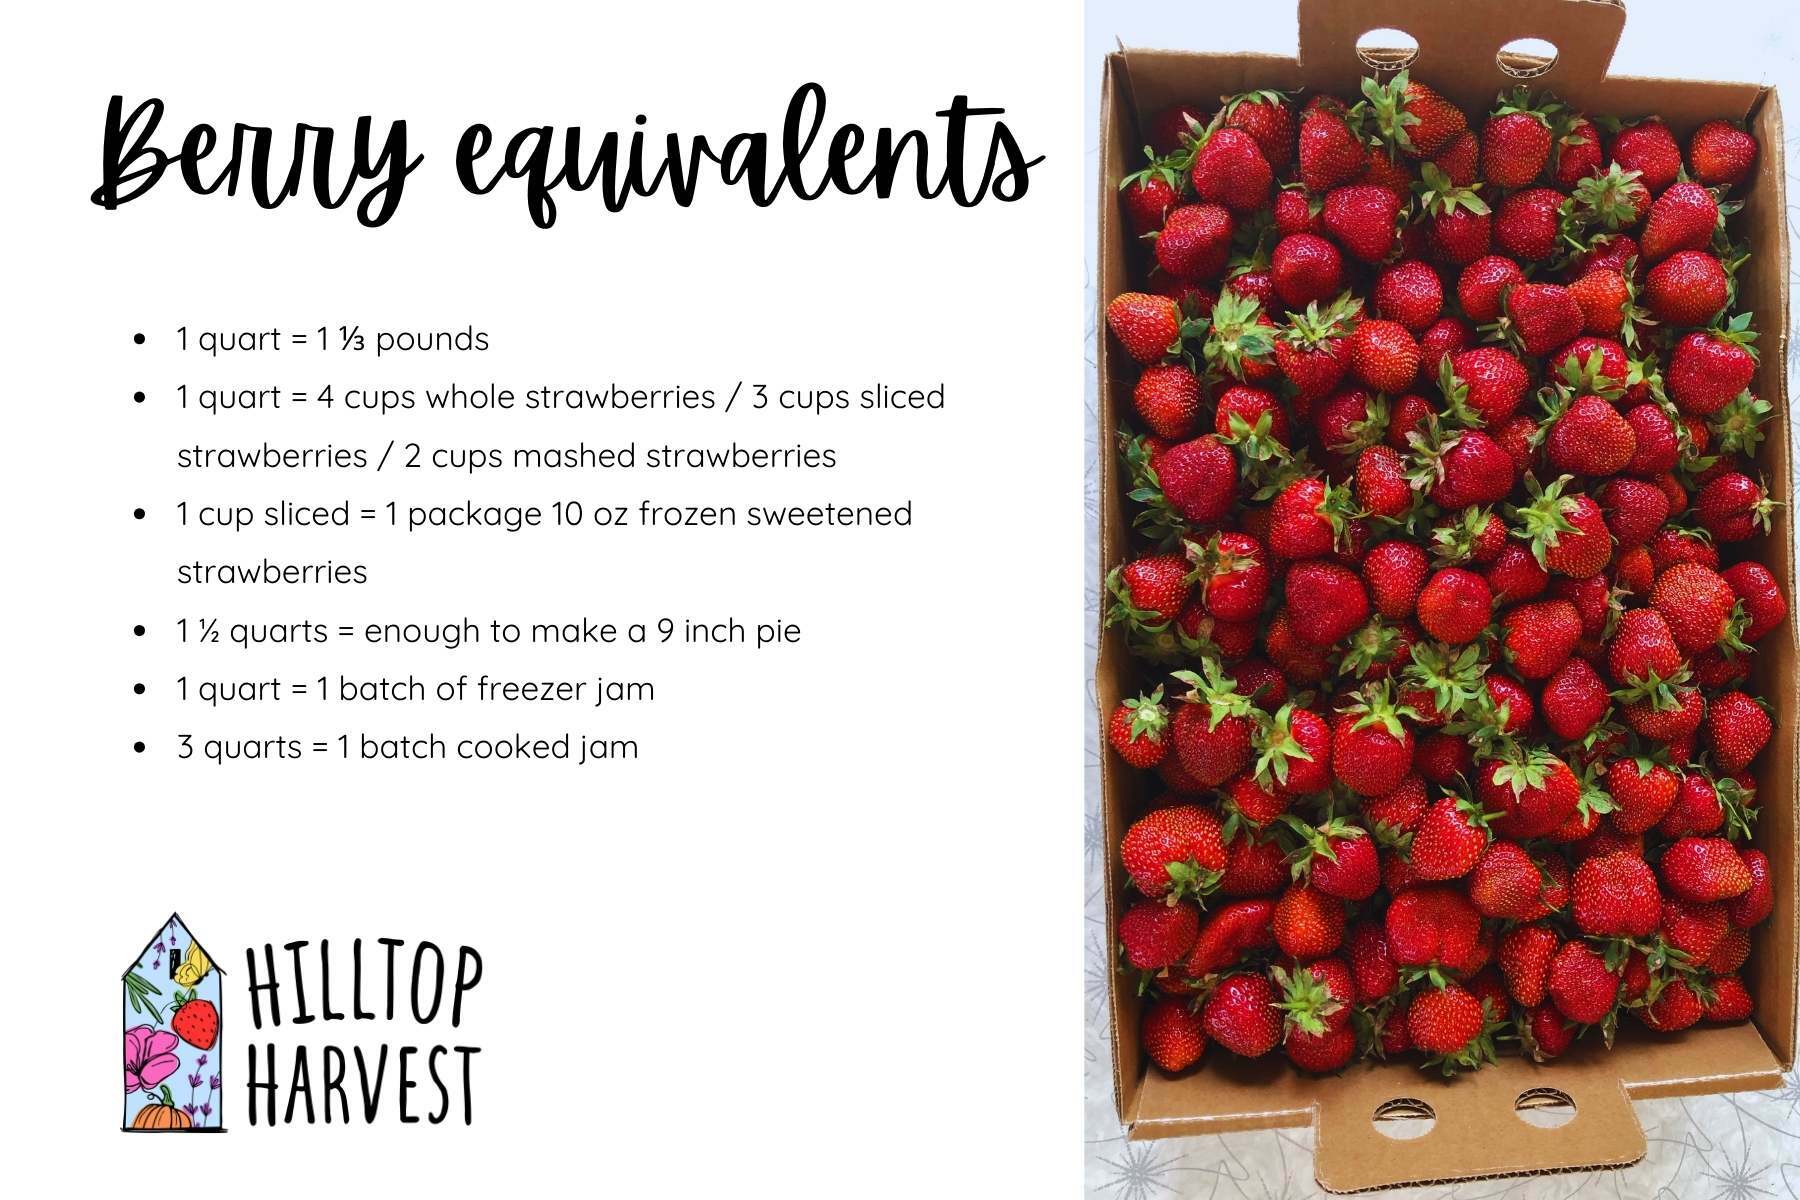 Berry Equivalents Infographic Recipe Card